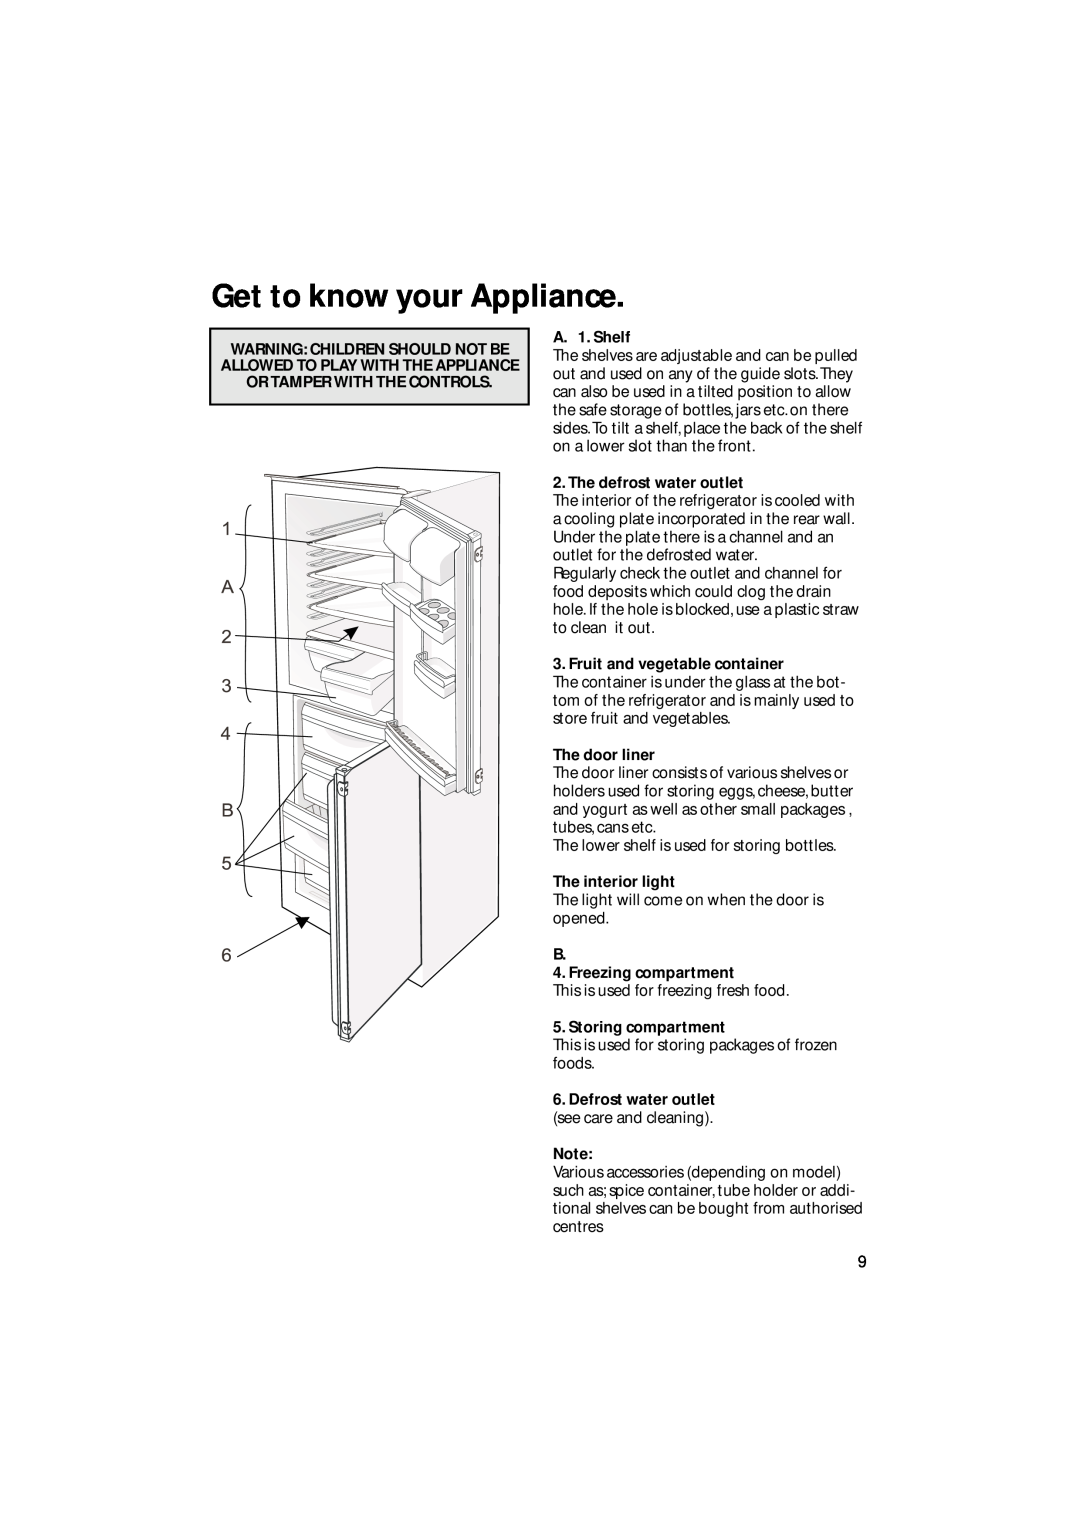 Hotpoint HM311i manual Get to know your Appliance, A. 1. Shelf, The defrost water outlet, Fruit and vegetable container 